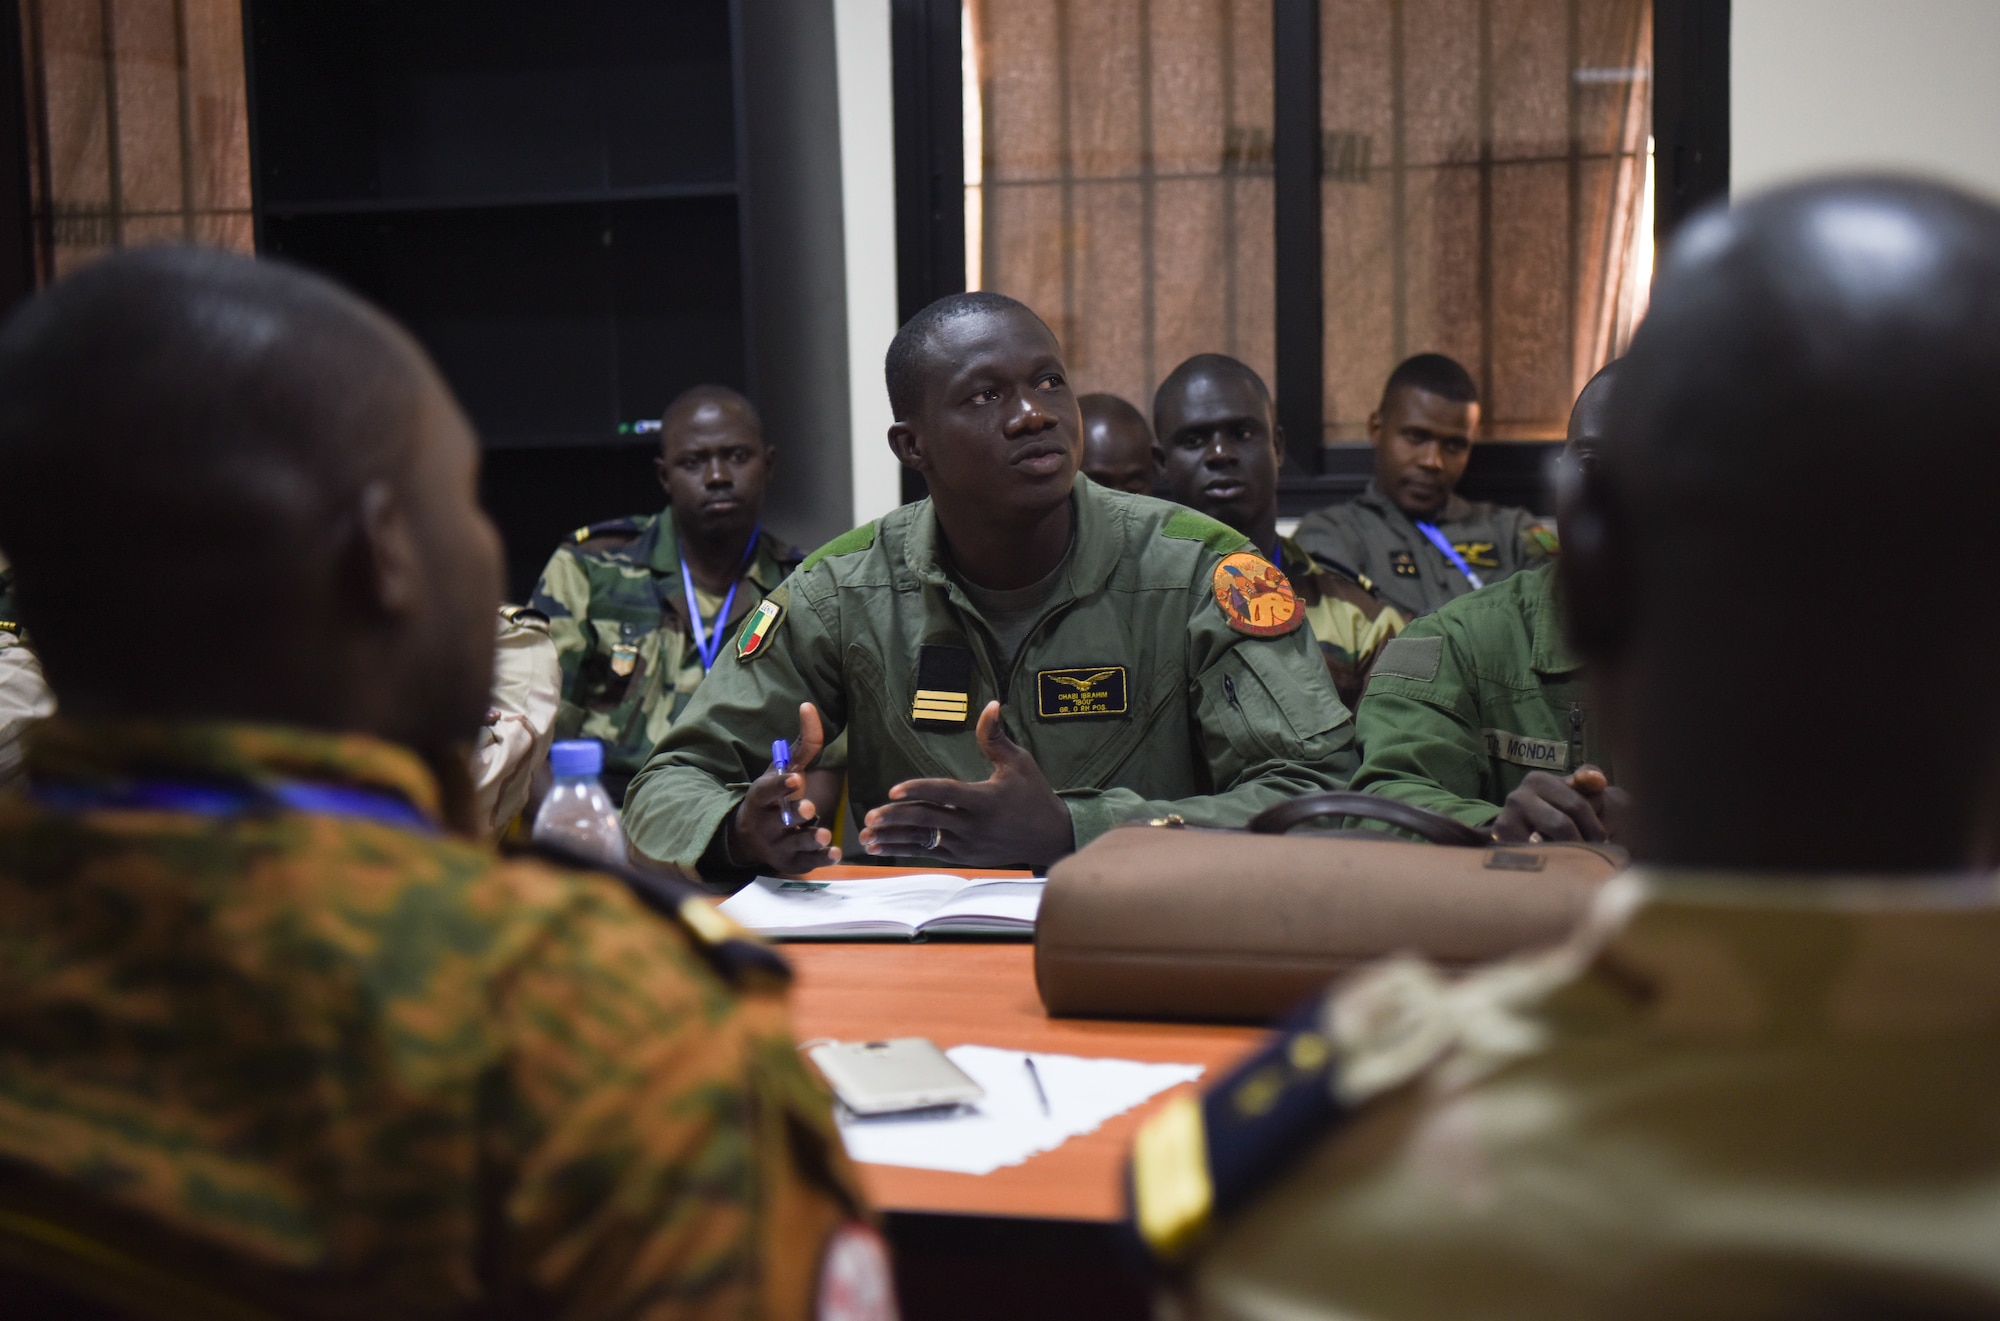 Benin helicopter pilot, Capt. Chabi Ibrahim, discusses safety in air operations during African Partnership Flight Senegal at Captain Andalla Cissé Air Base, Senegal, March 20, 2018. APF Senegal is a multilateral, military-to-military engagement emphasizing security assistance with African air forces. (U.S. Air Force photo by Capt. Kay Magdalena Nissen)